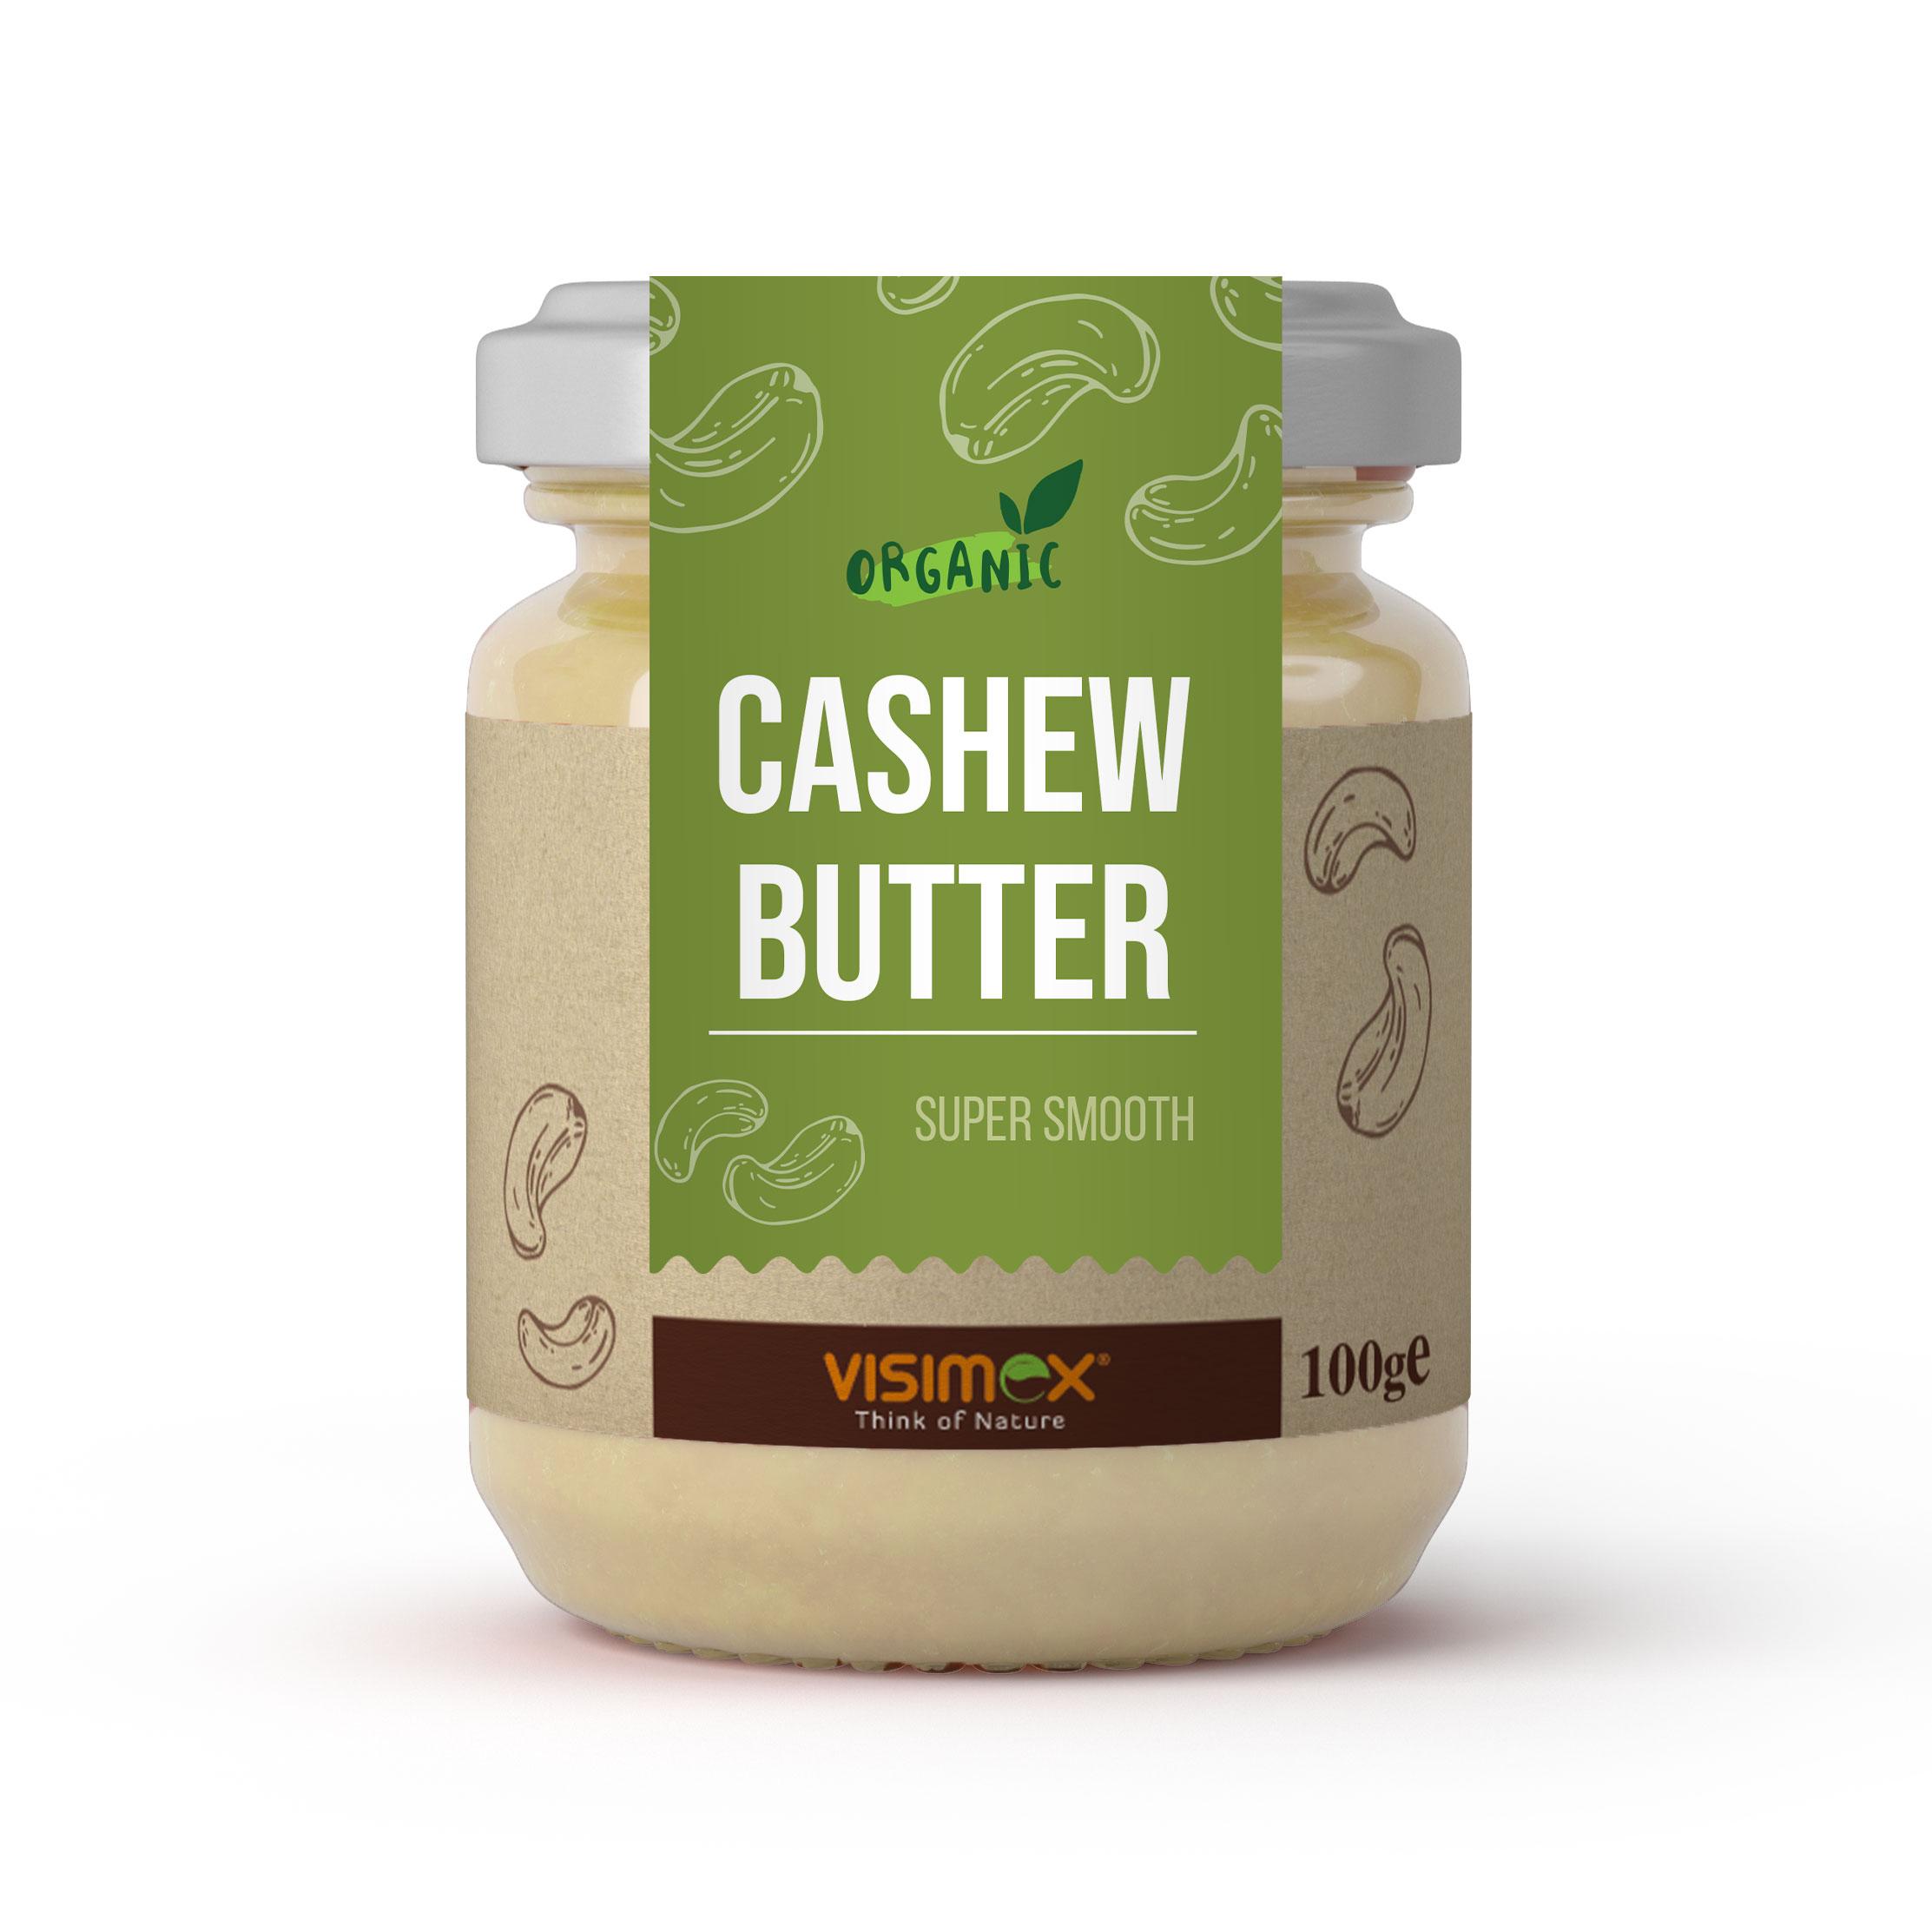 Discover the Creamy Goodness of Organic Cashew Butter by Visimex